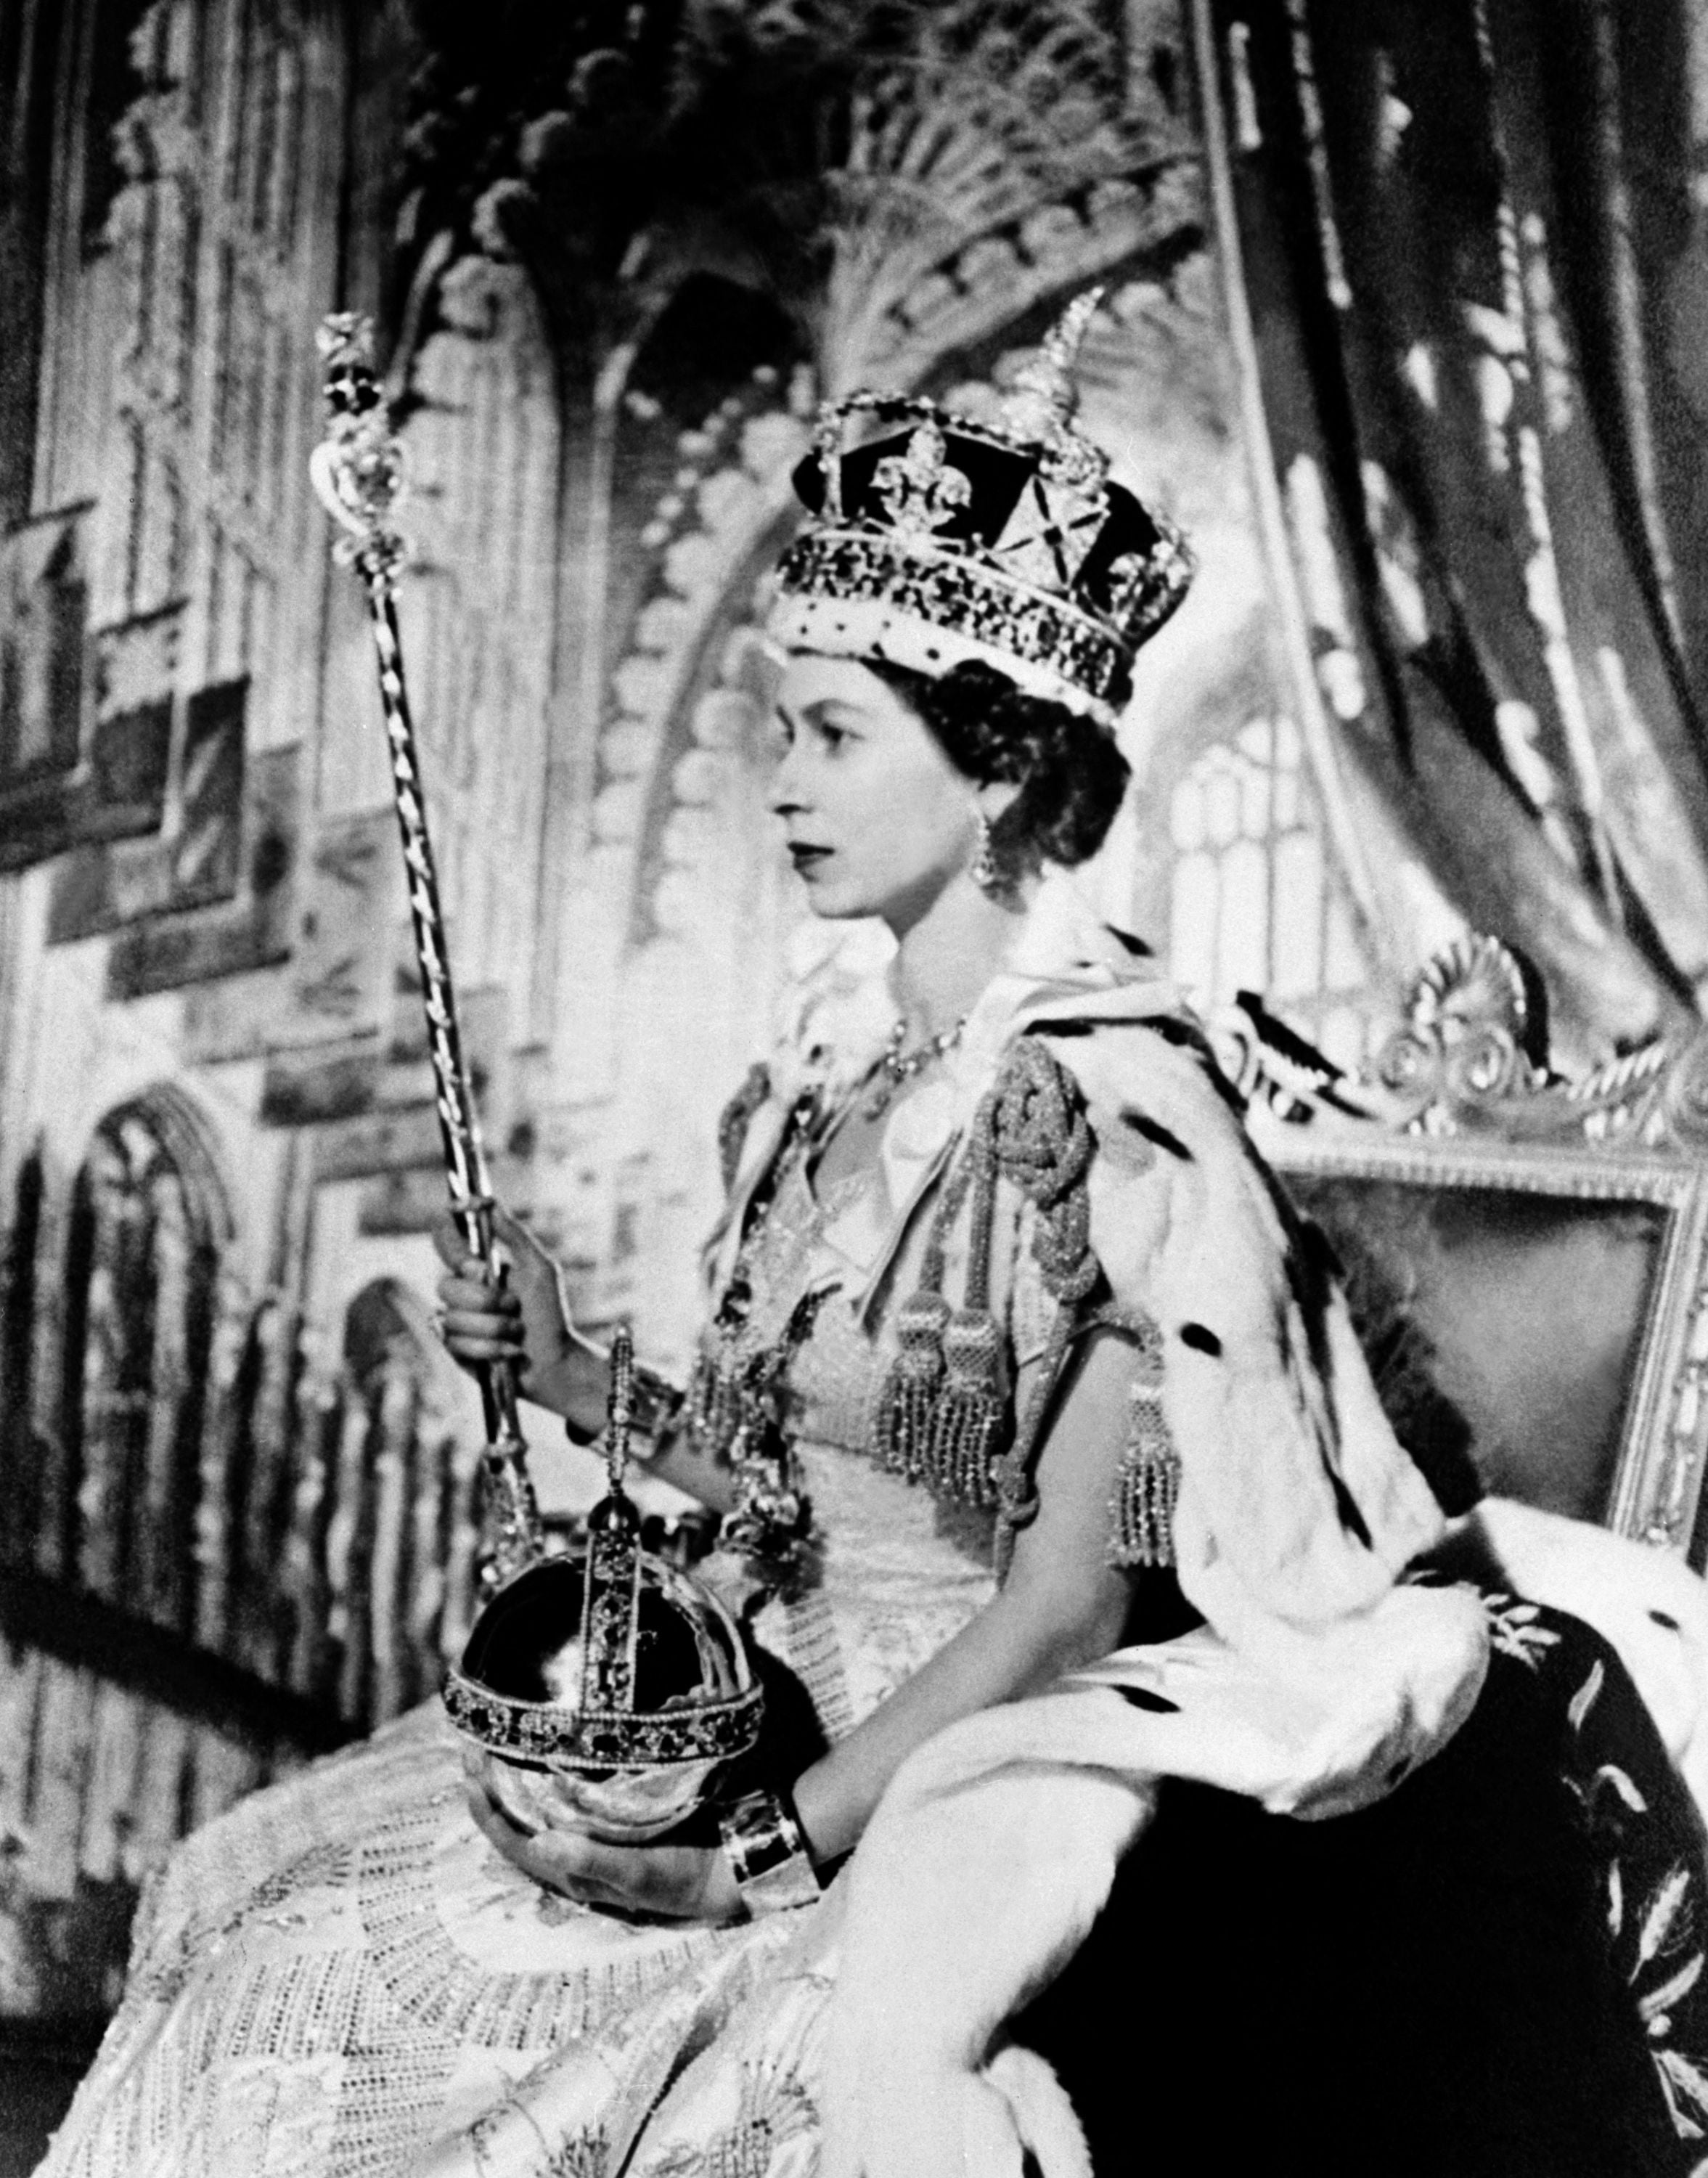 In this file photo taken on 2 June, 1953 the Queen Elizabeth II poses on her Coronation day, in London